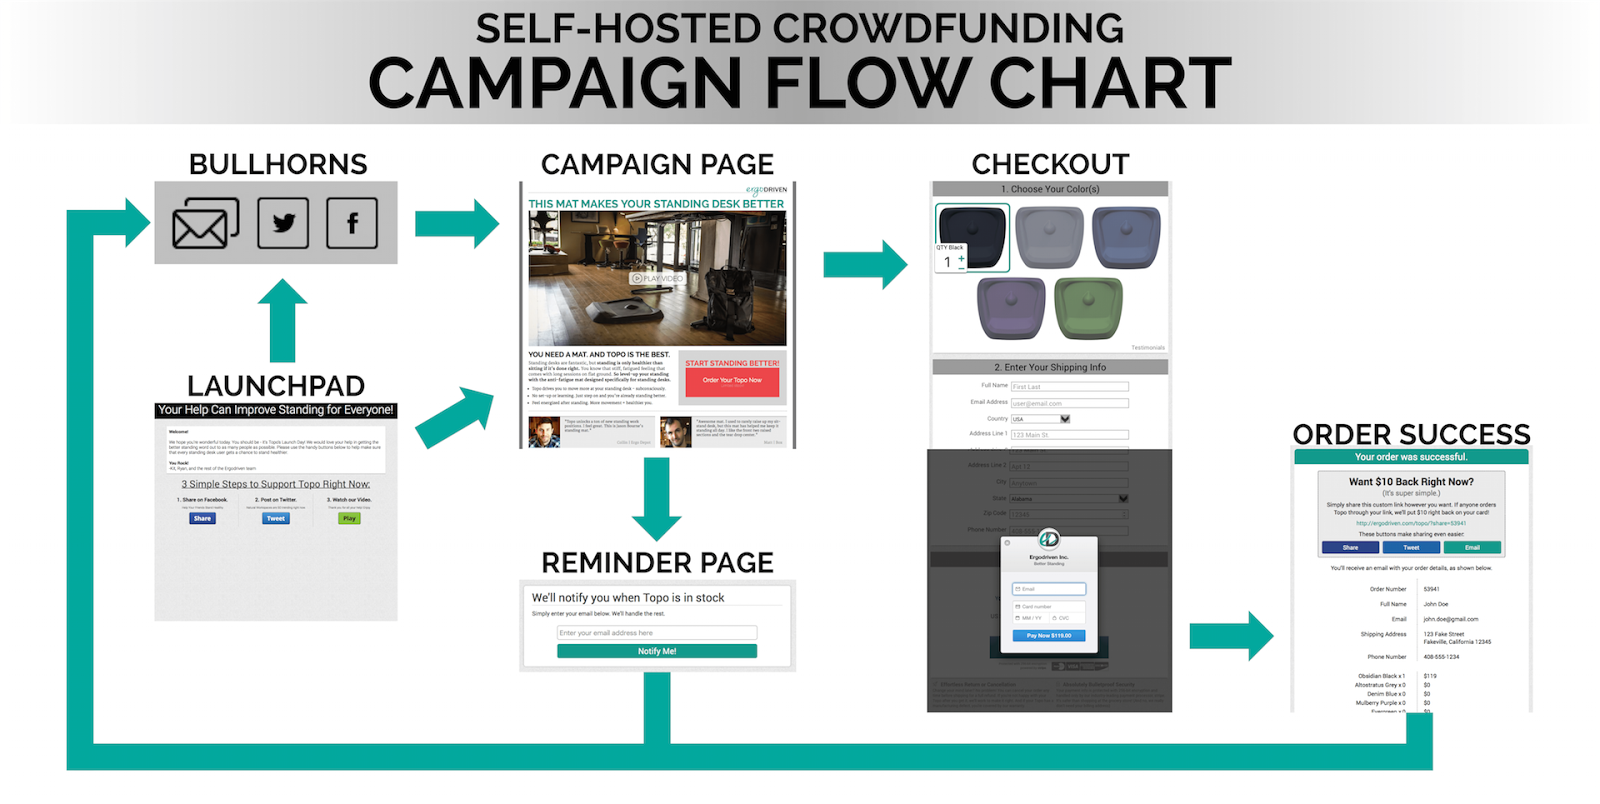 A flow chart showing what a self-hosted crowdfunding campaign should be like